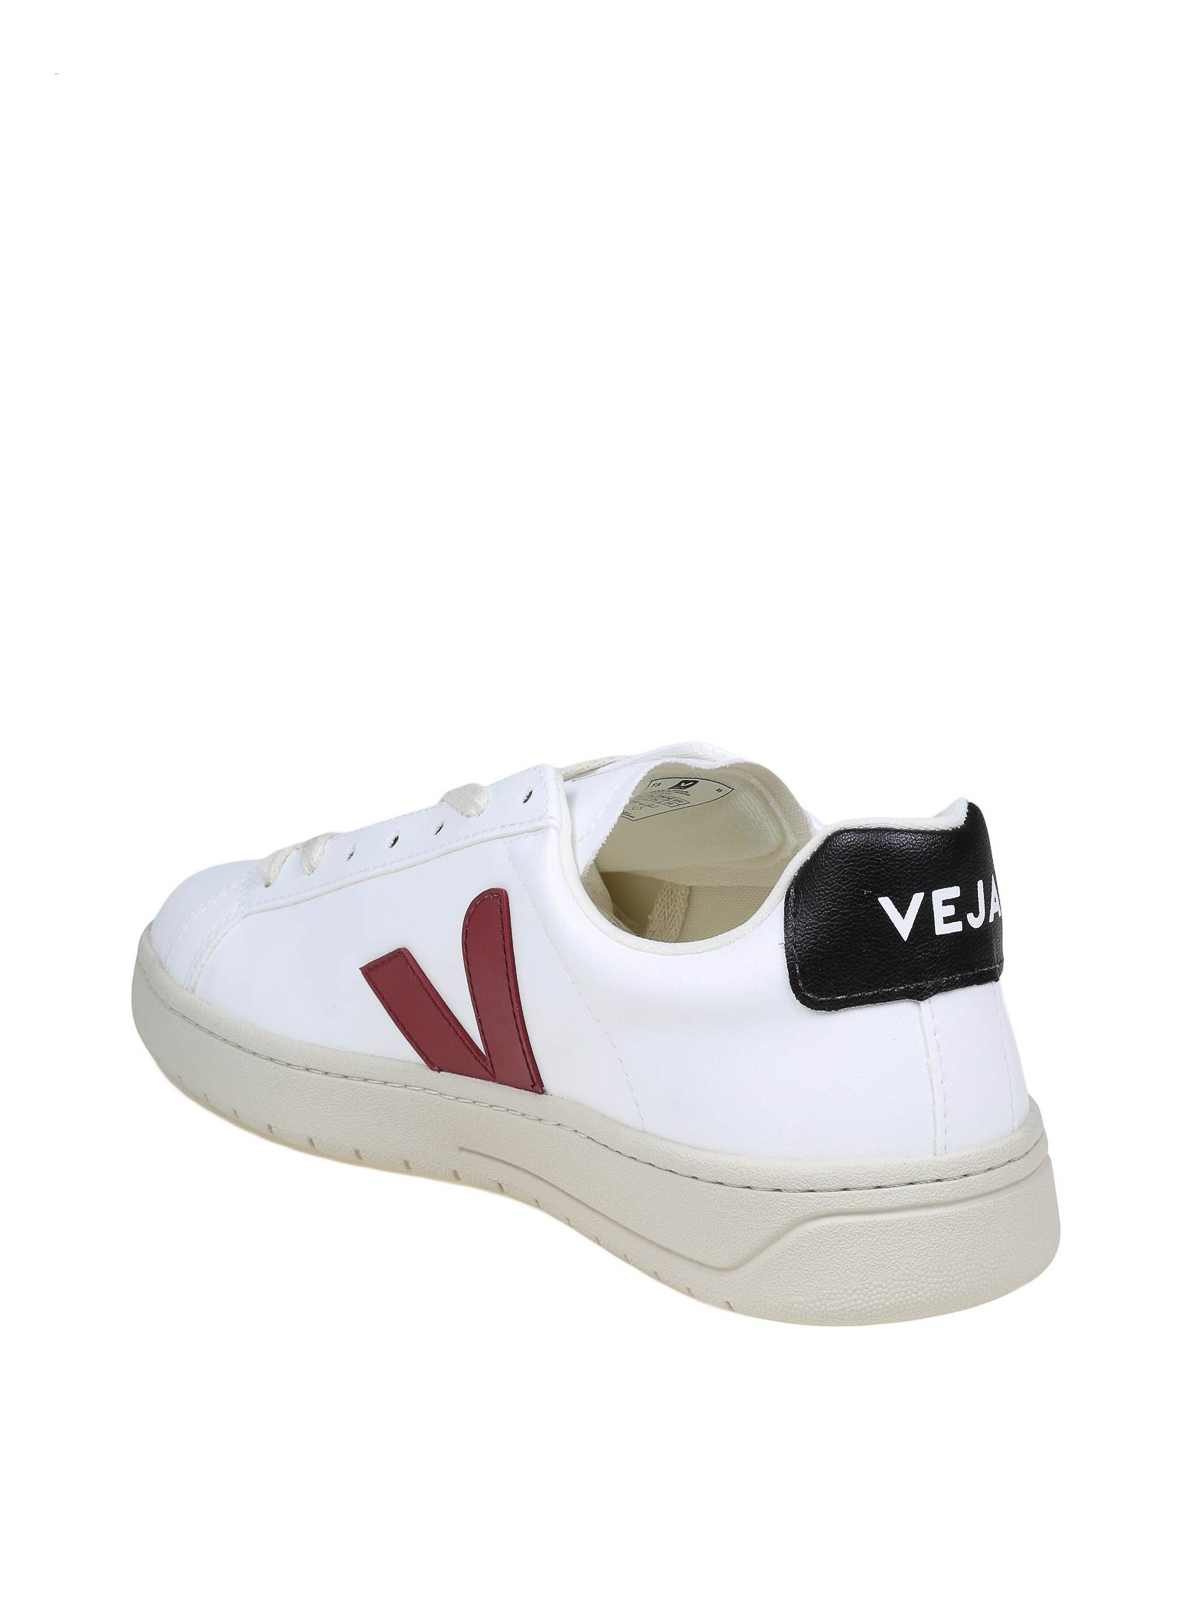 Shop Veja Urca Leather Sneakers In White